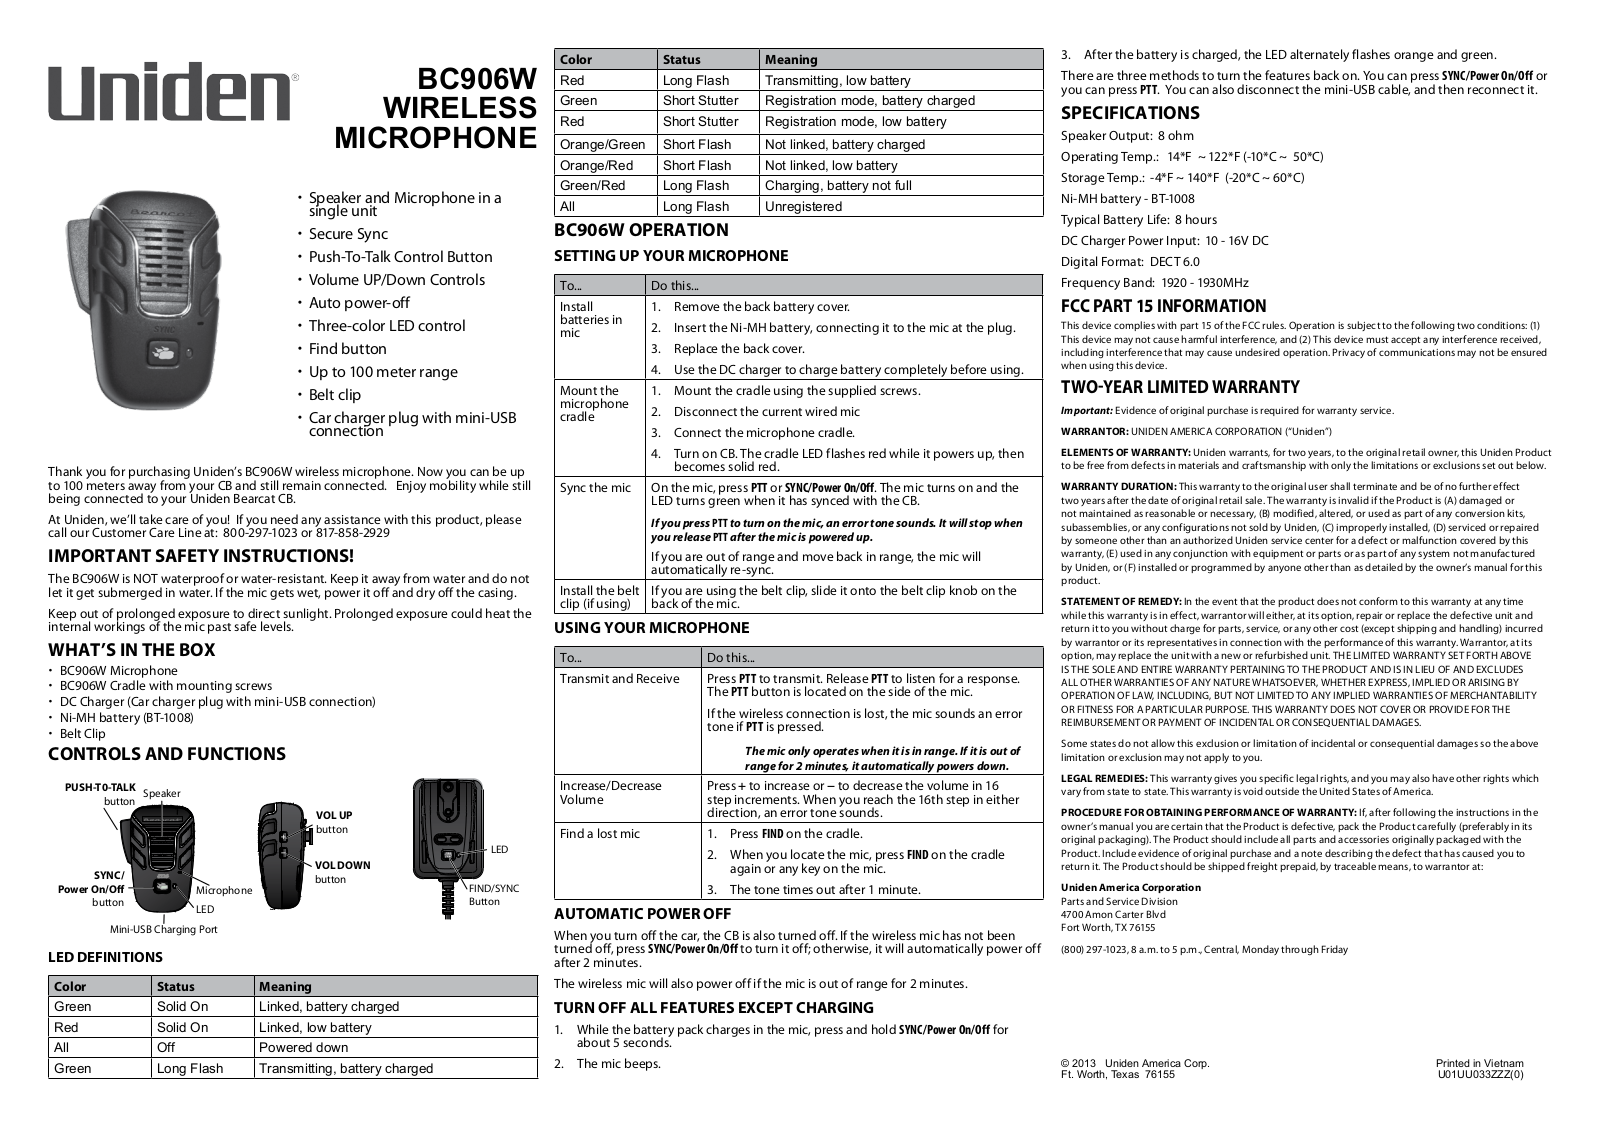 Uniden BC906W Owner's Manual